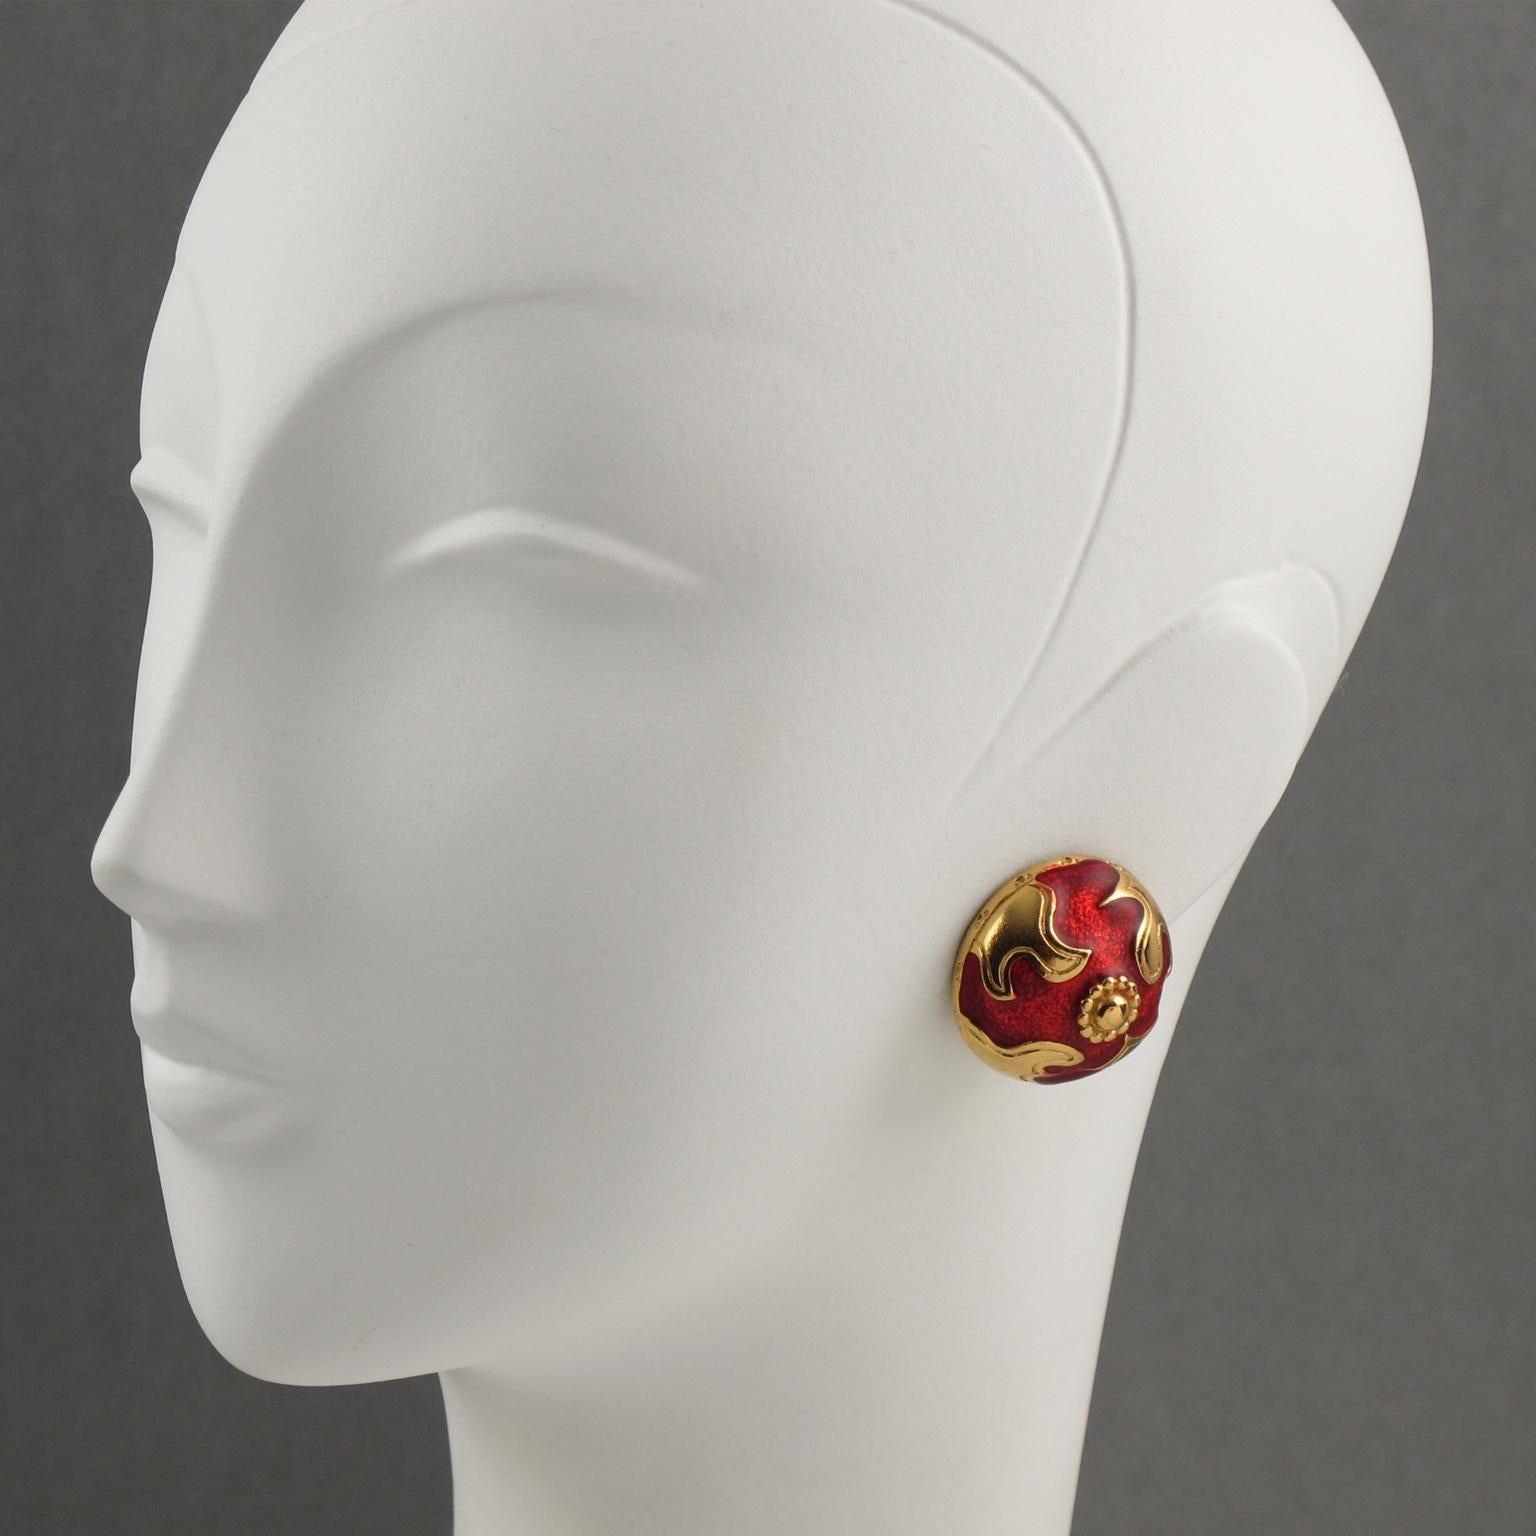 Lovely Yves Saint Laurent YSL Paris signed clip on earrings. Baroque round domed shape, shiny gilt metal with texture ornate with bright red enamel. Signed at the back with YSL pierced logo on clip and engraved underside: 'YSL logo - Made in